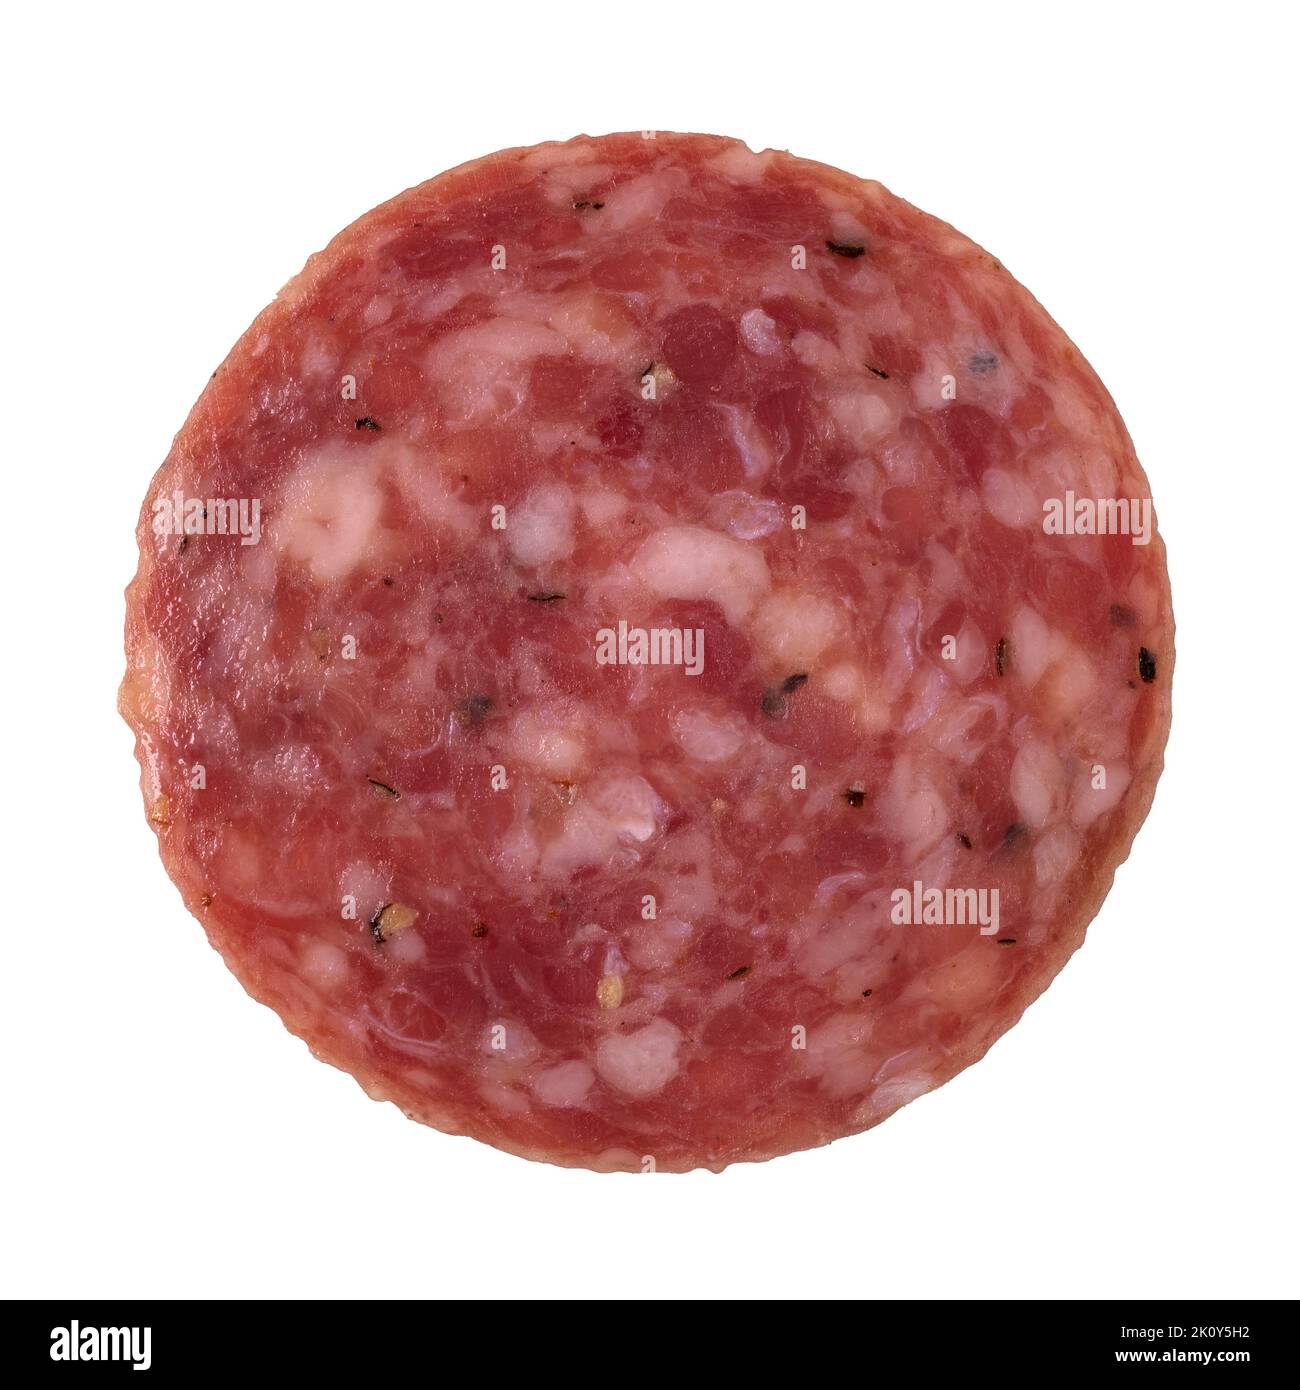 Top view of a single slice of dry salami isolated on a white background. Stock Photo